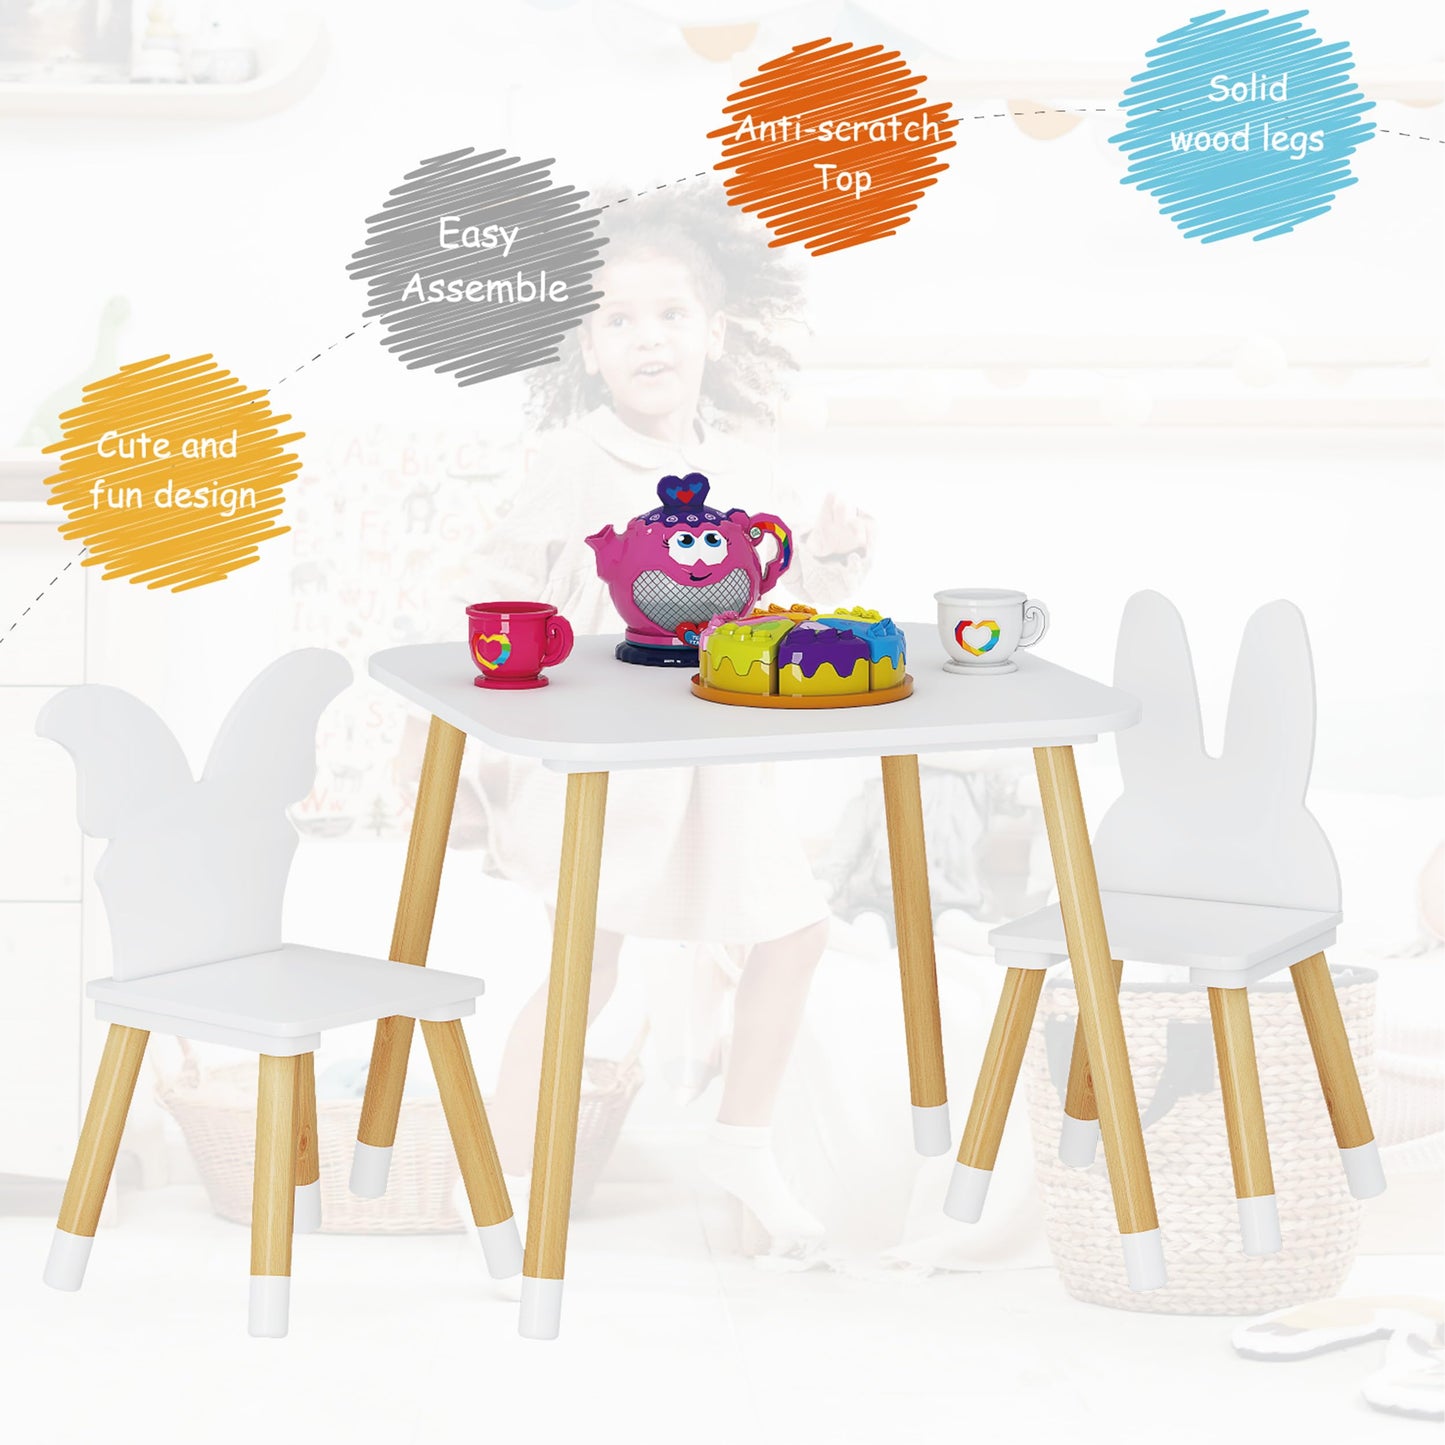 UTEX Kids Table with 2 Chairs Set for Toddlers, Boys, Girls, 3 Piece Kiddy Table and Chairs Set, White